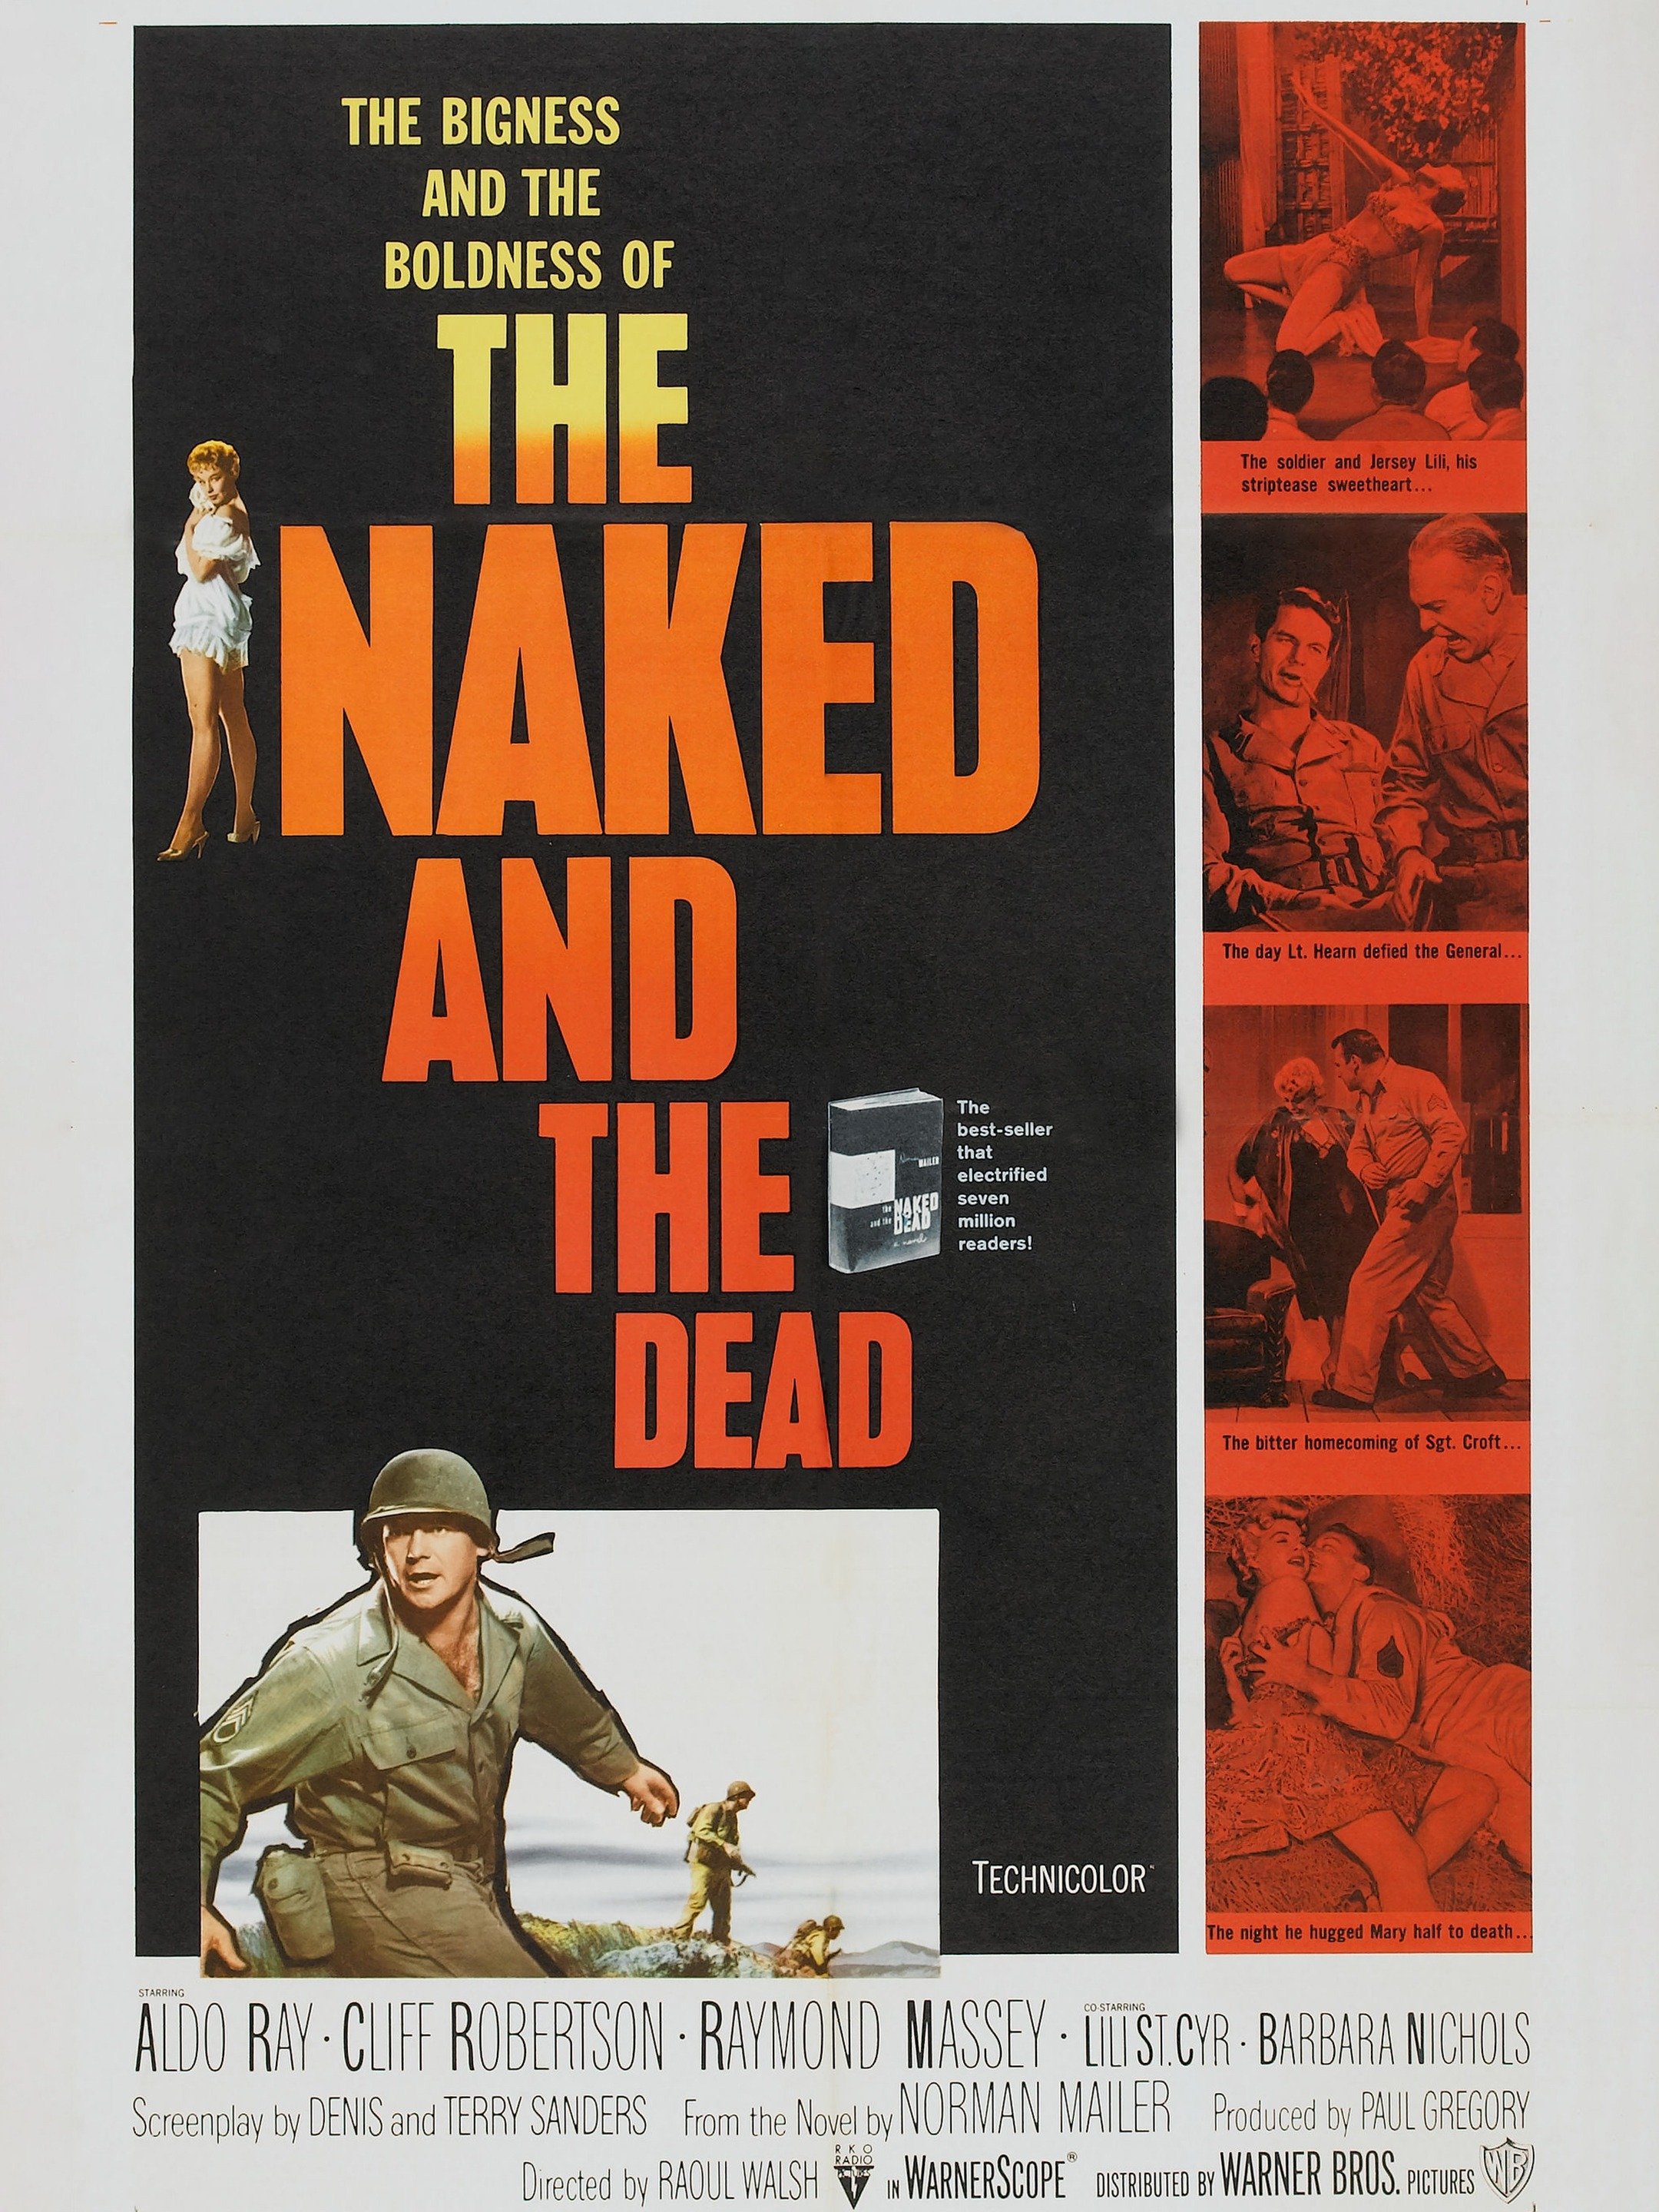 The Naked and the Dead pic